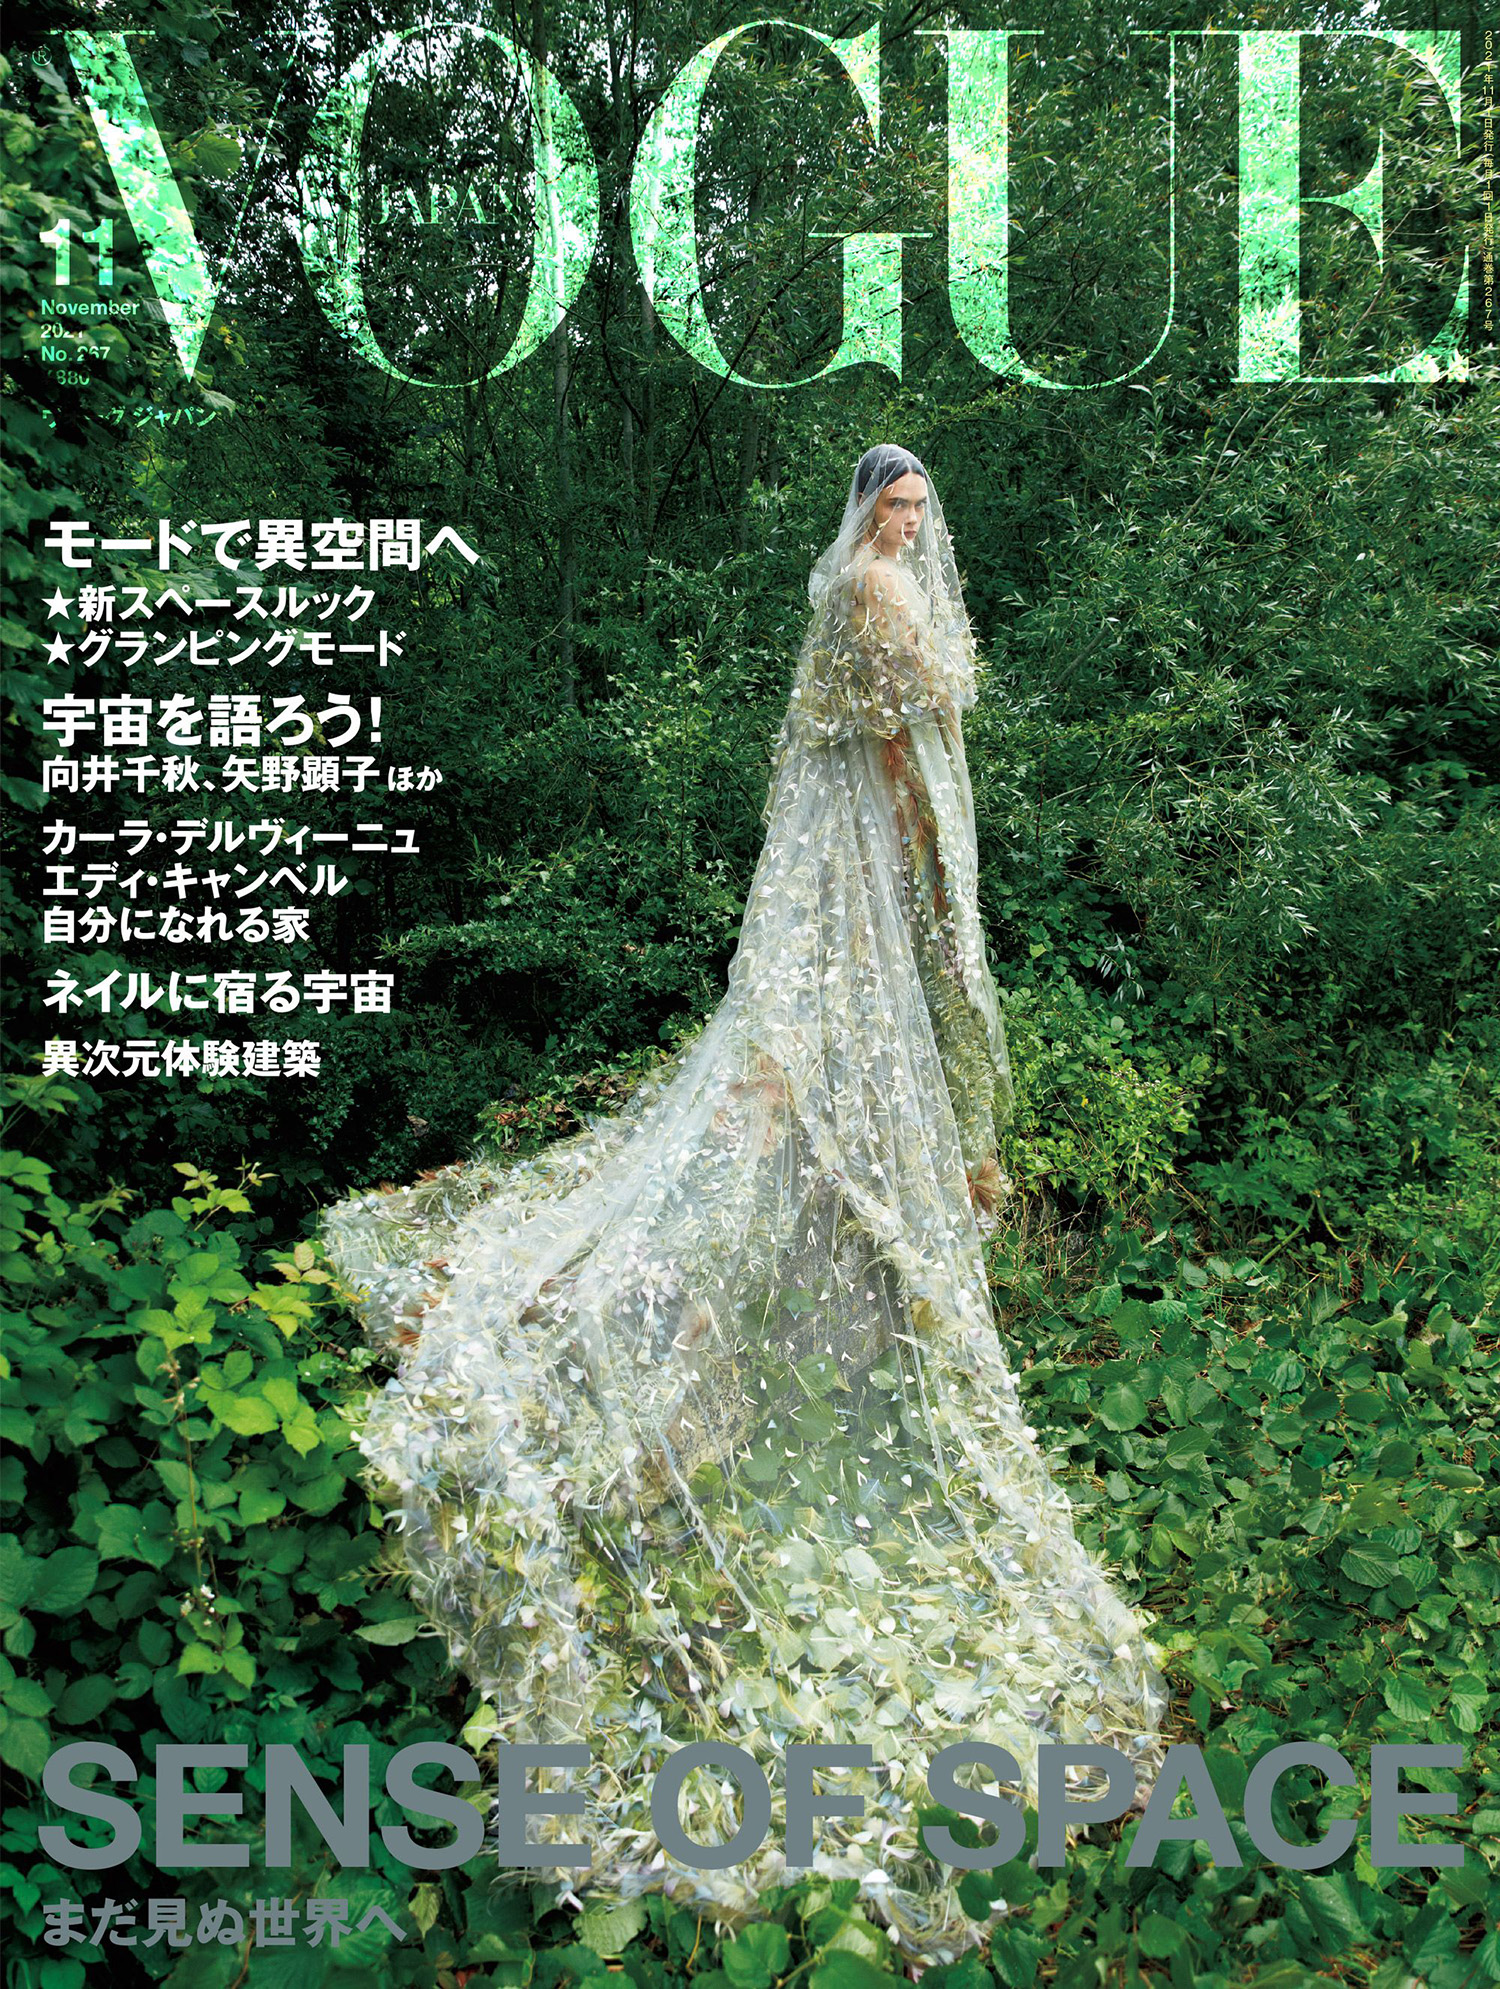 Cara Delevingne shines in Christian Dior Haute Couture on Vogue Japan November 2021 cover